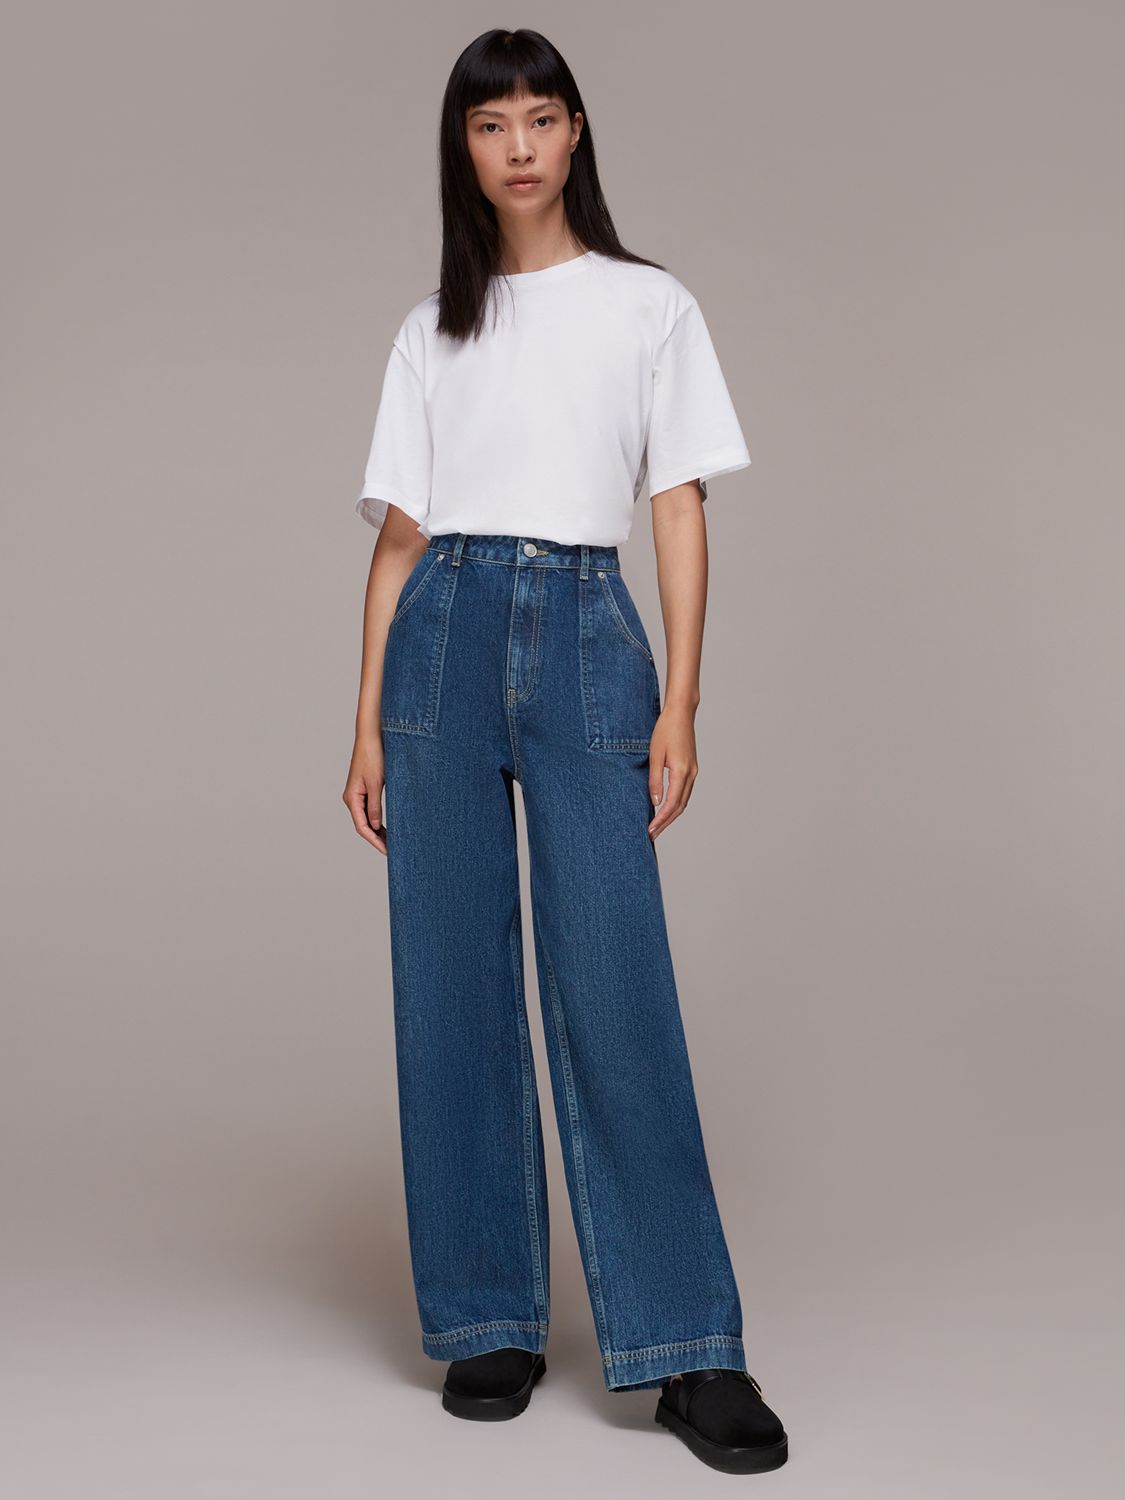 Whistles Petite Authentic Raya Straight Jeans, Blue, 29